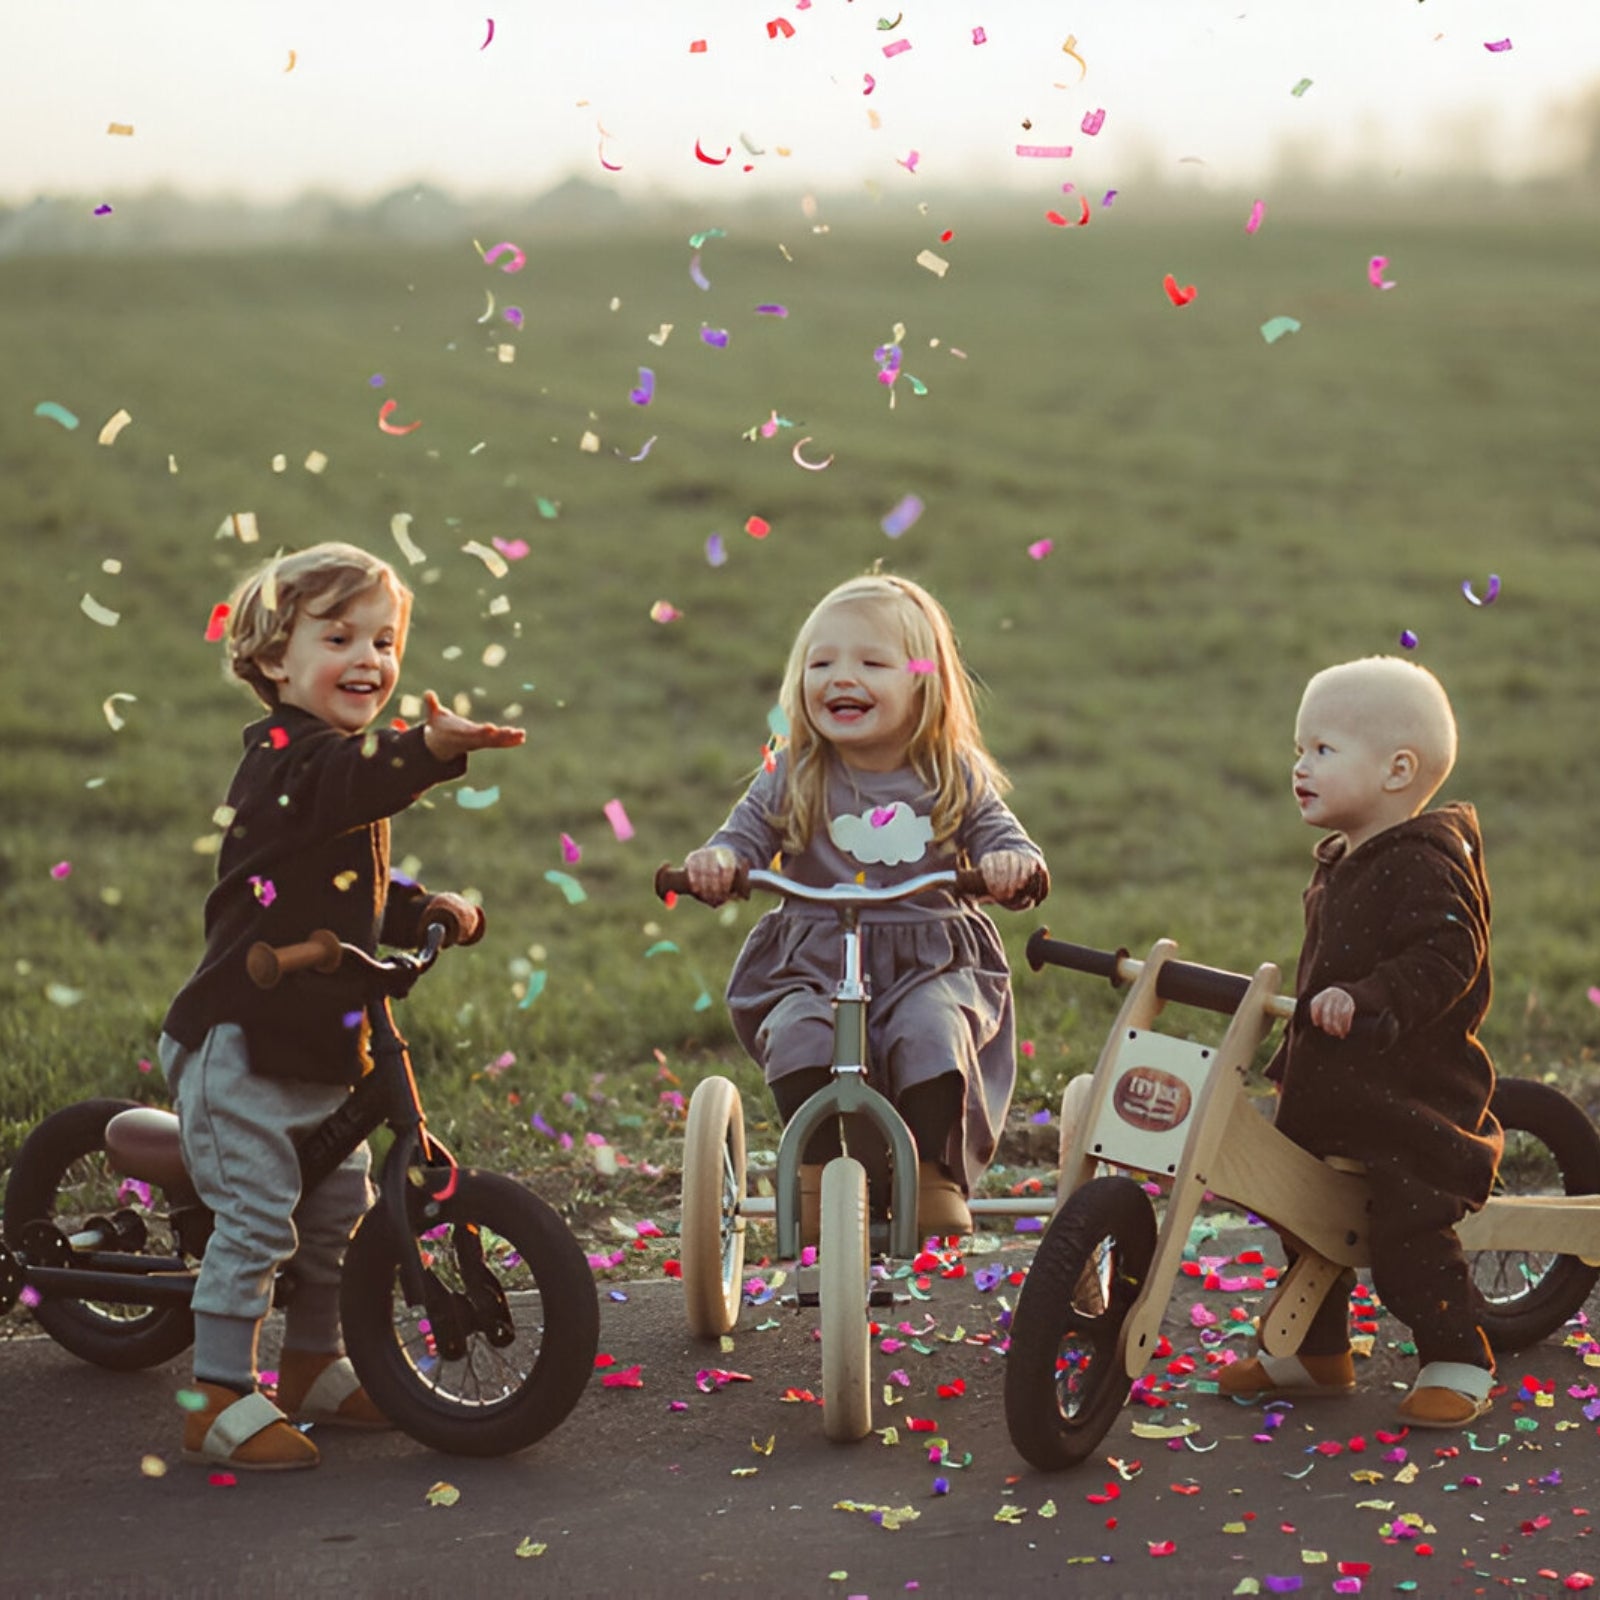 Joyful moments with Trybike Black as children celebrate with colorful confetti.